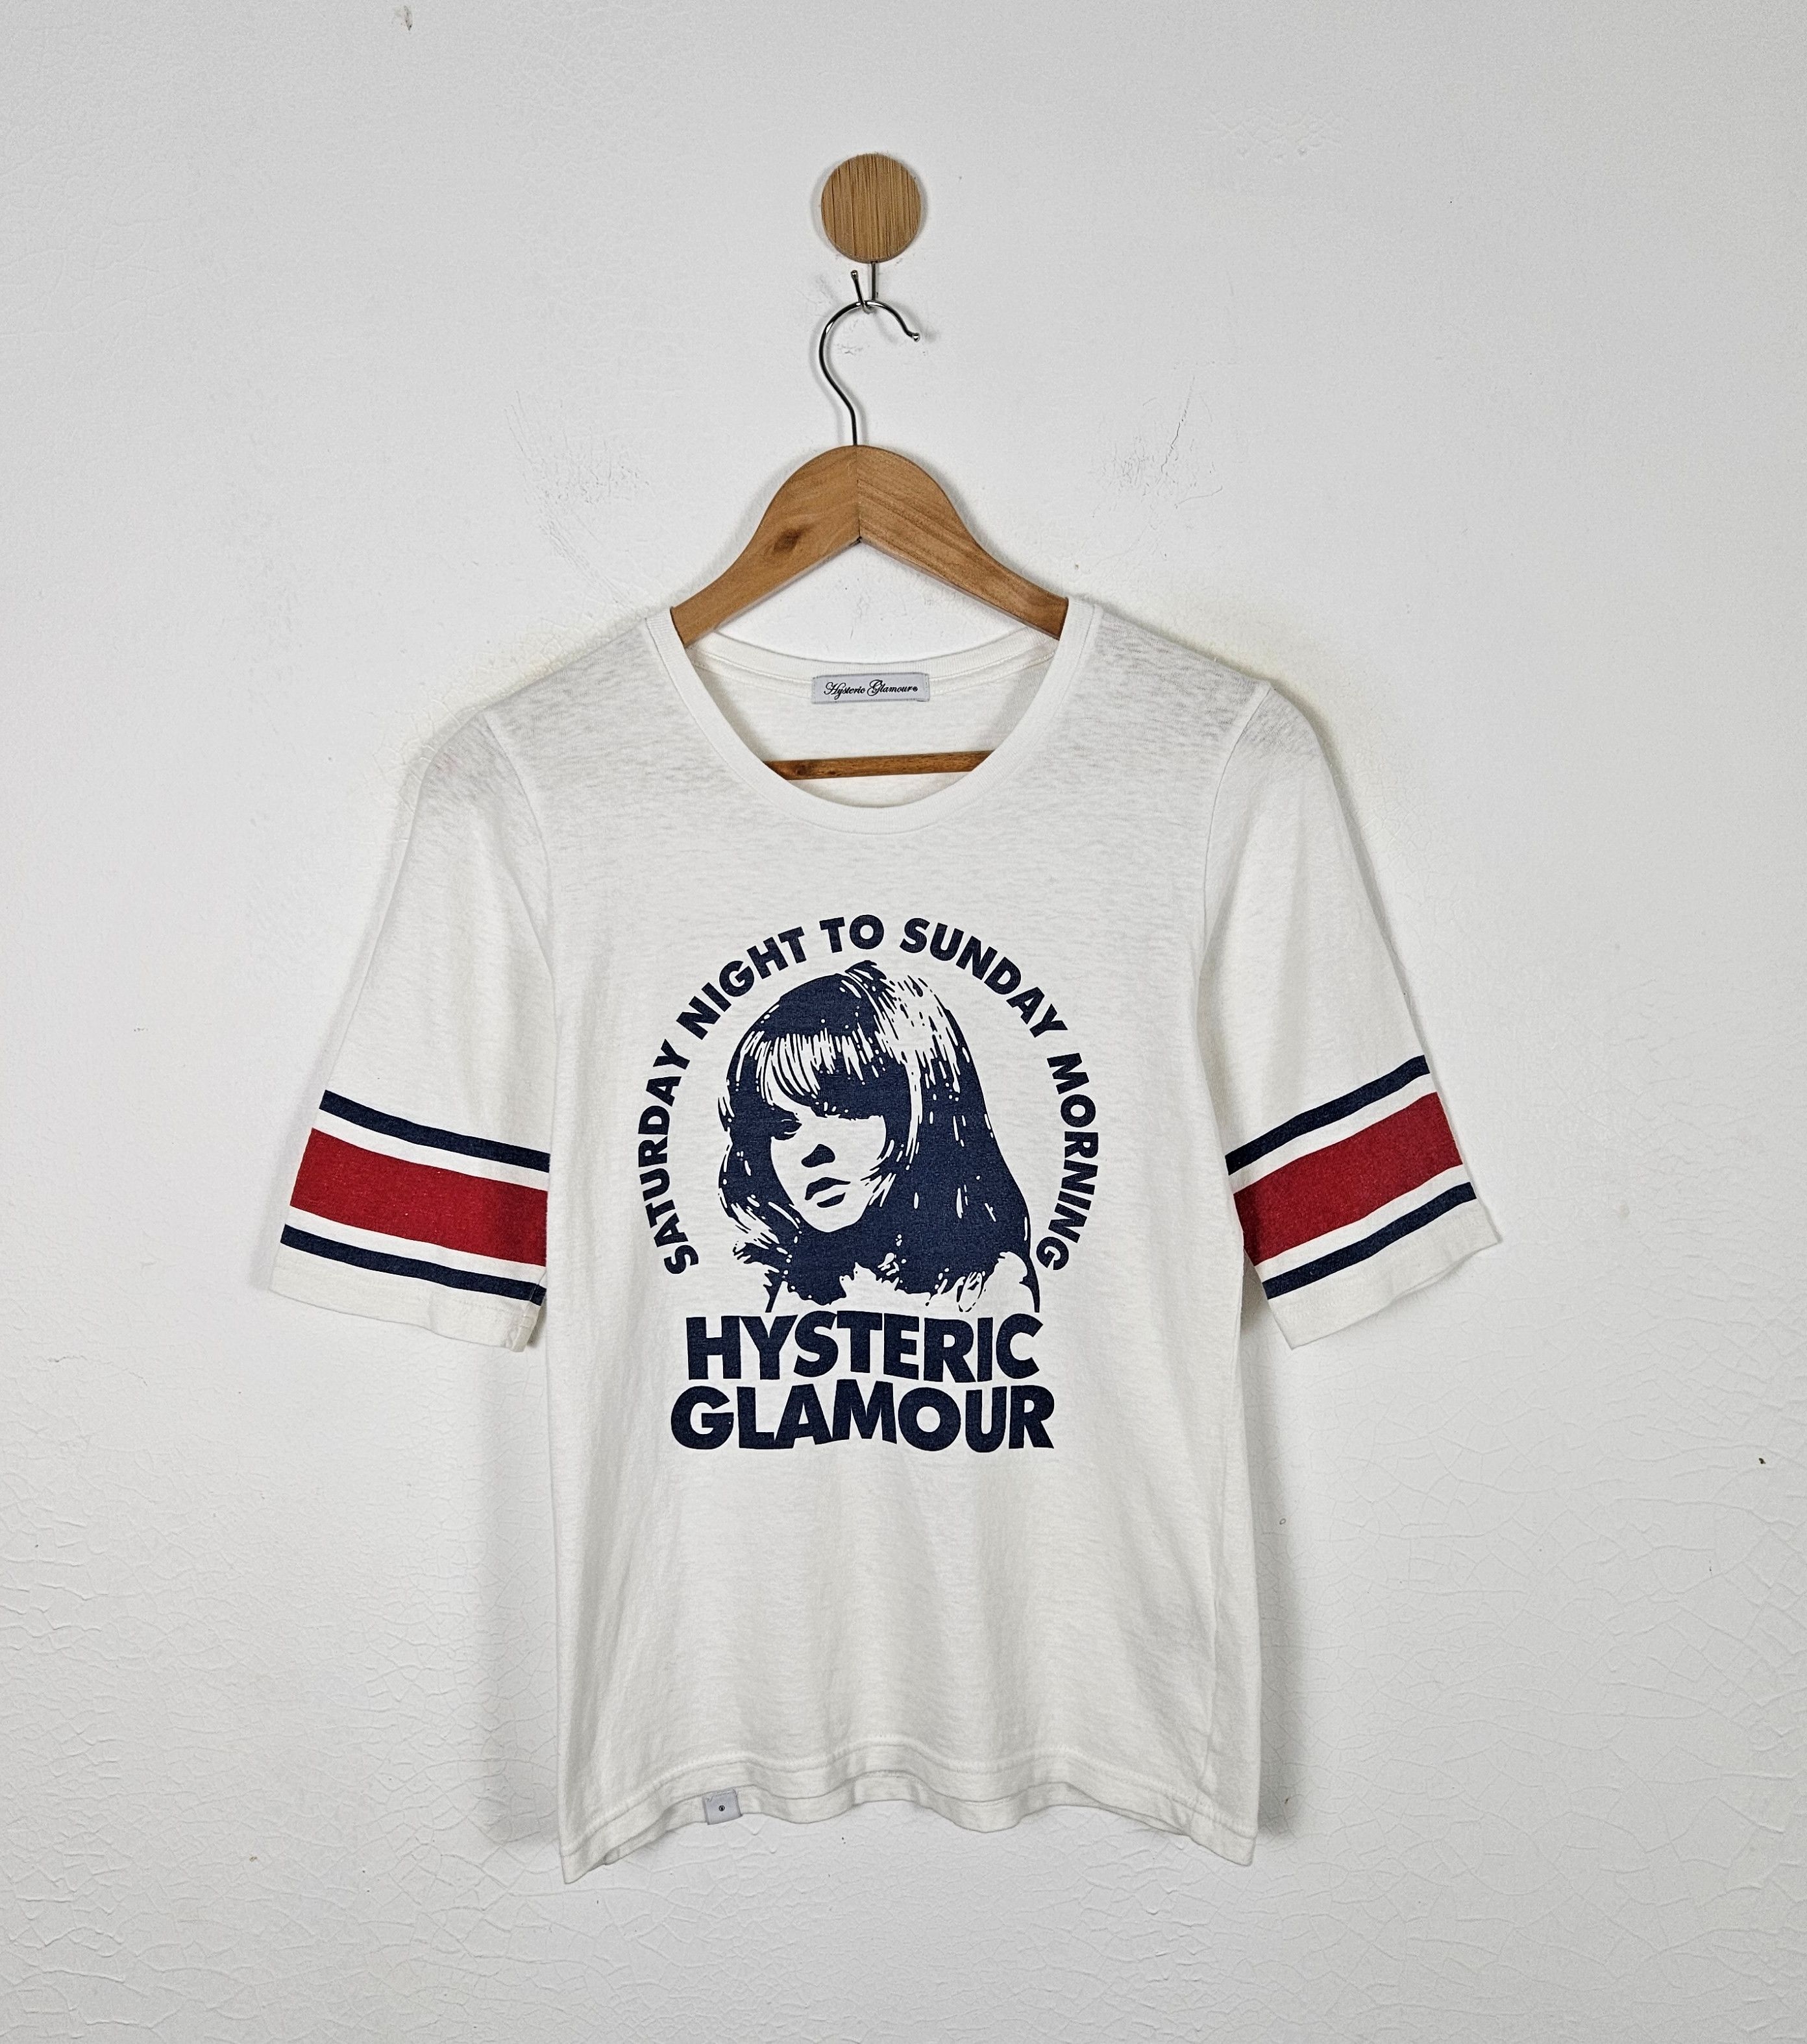 Hysteric Glamour Hysteric Glamour Saturday Night to Sunday Morning